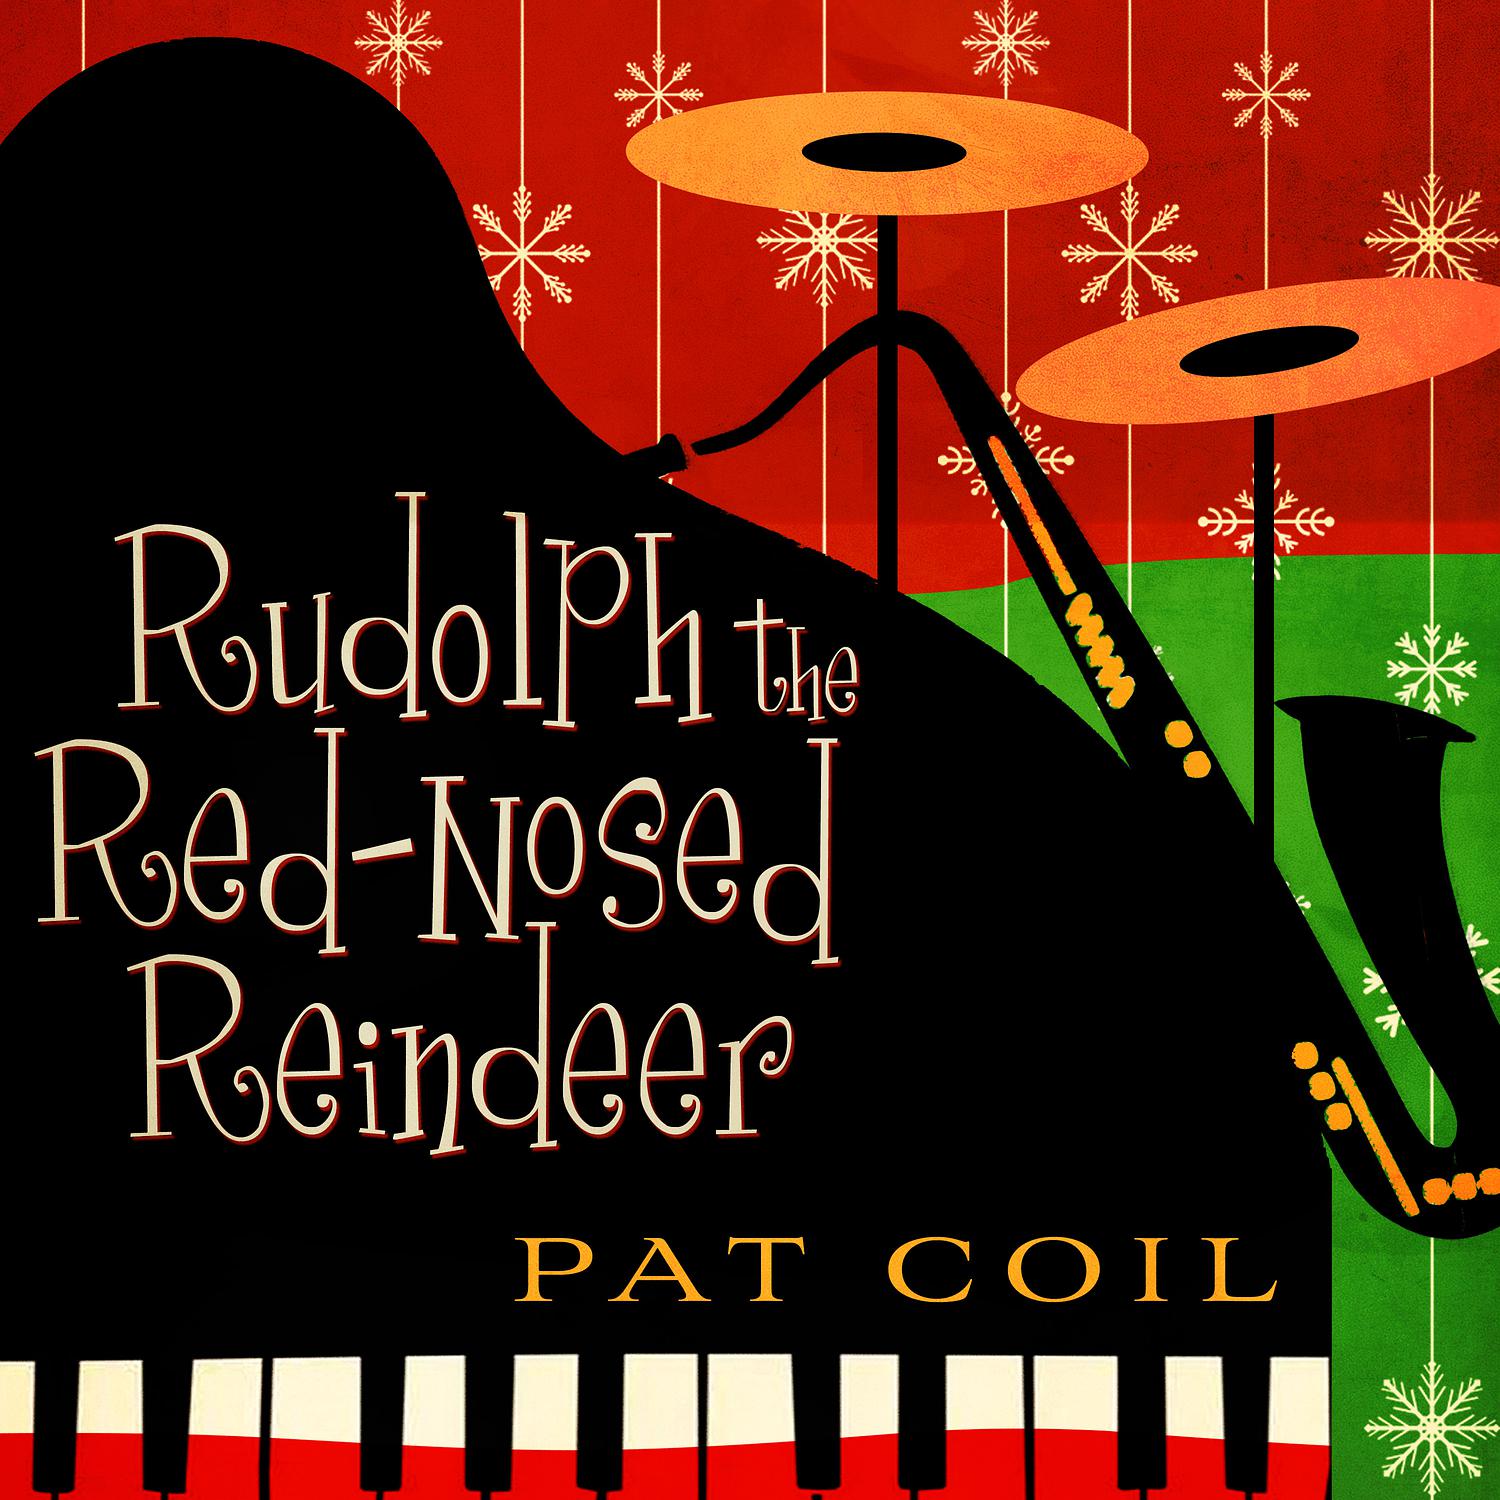 Pat Coil - Rudolph the Red-Nosed Reindeer